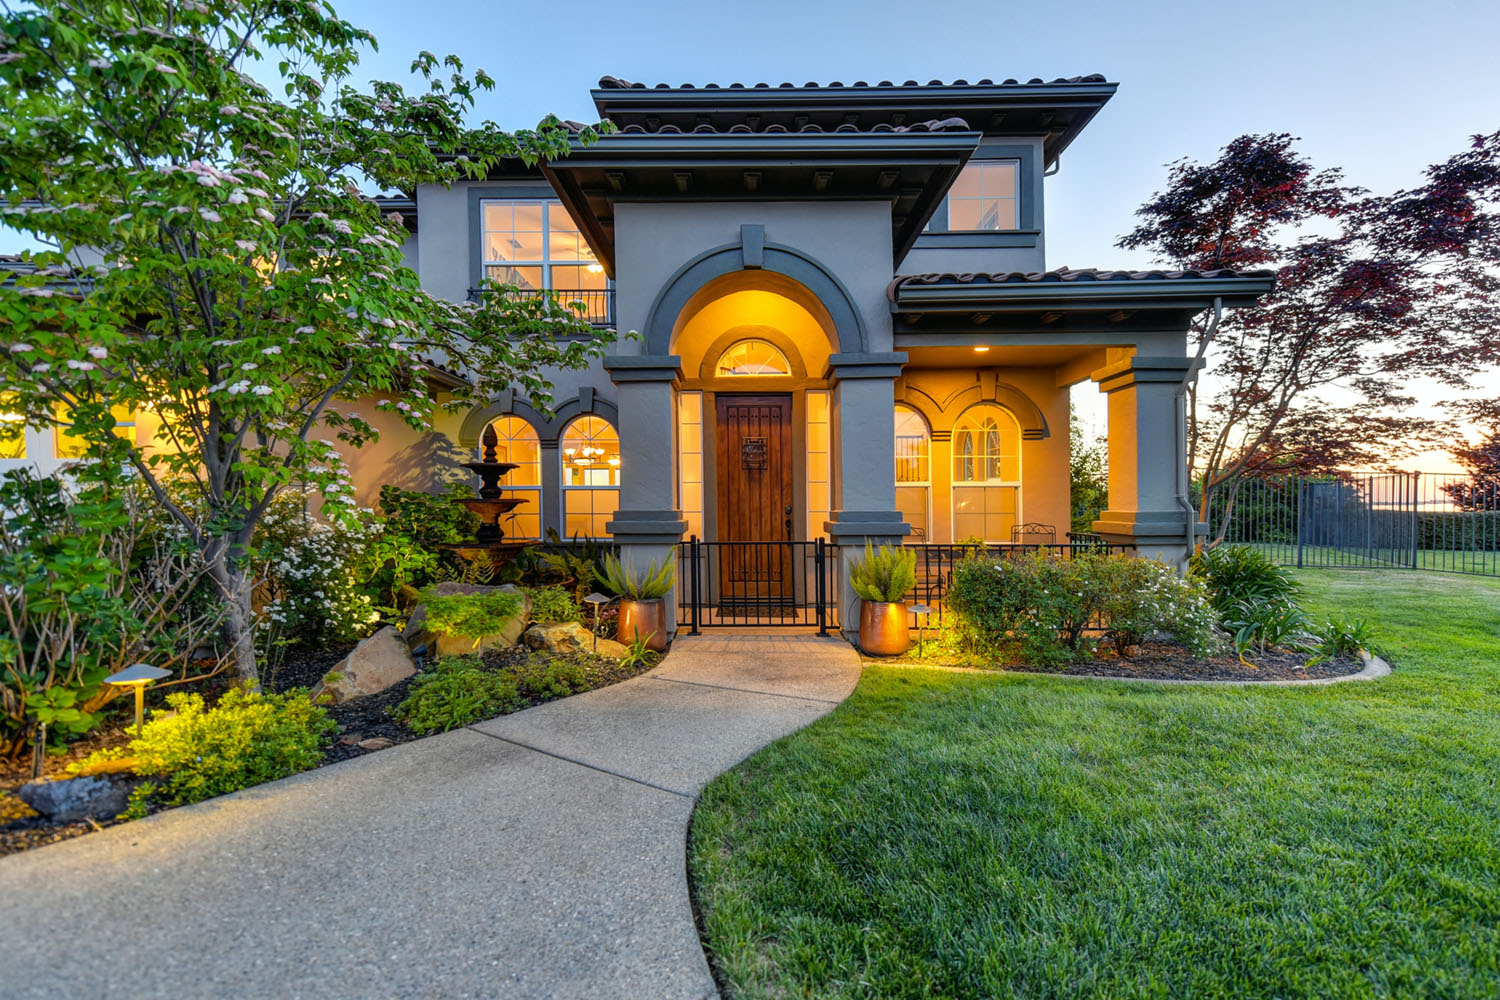 A beautifully landscaped front yard of a luxury home